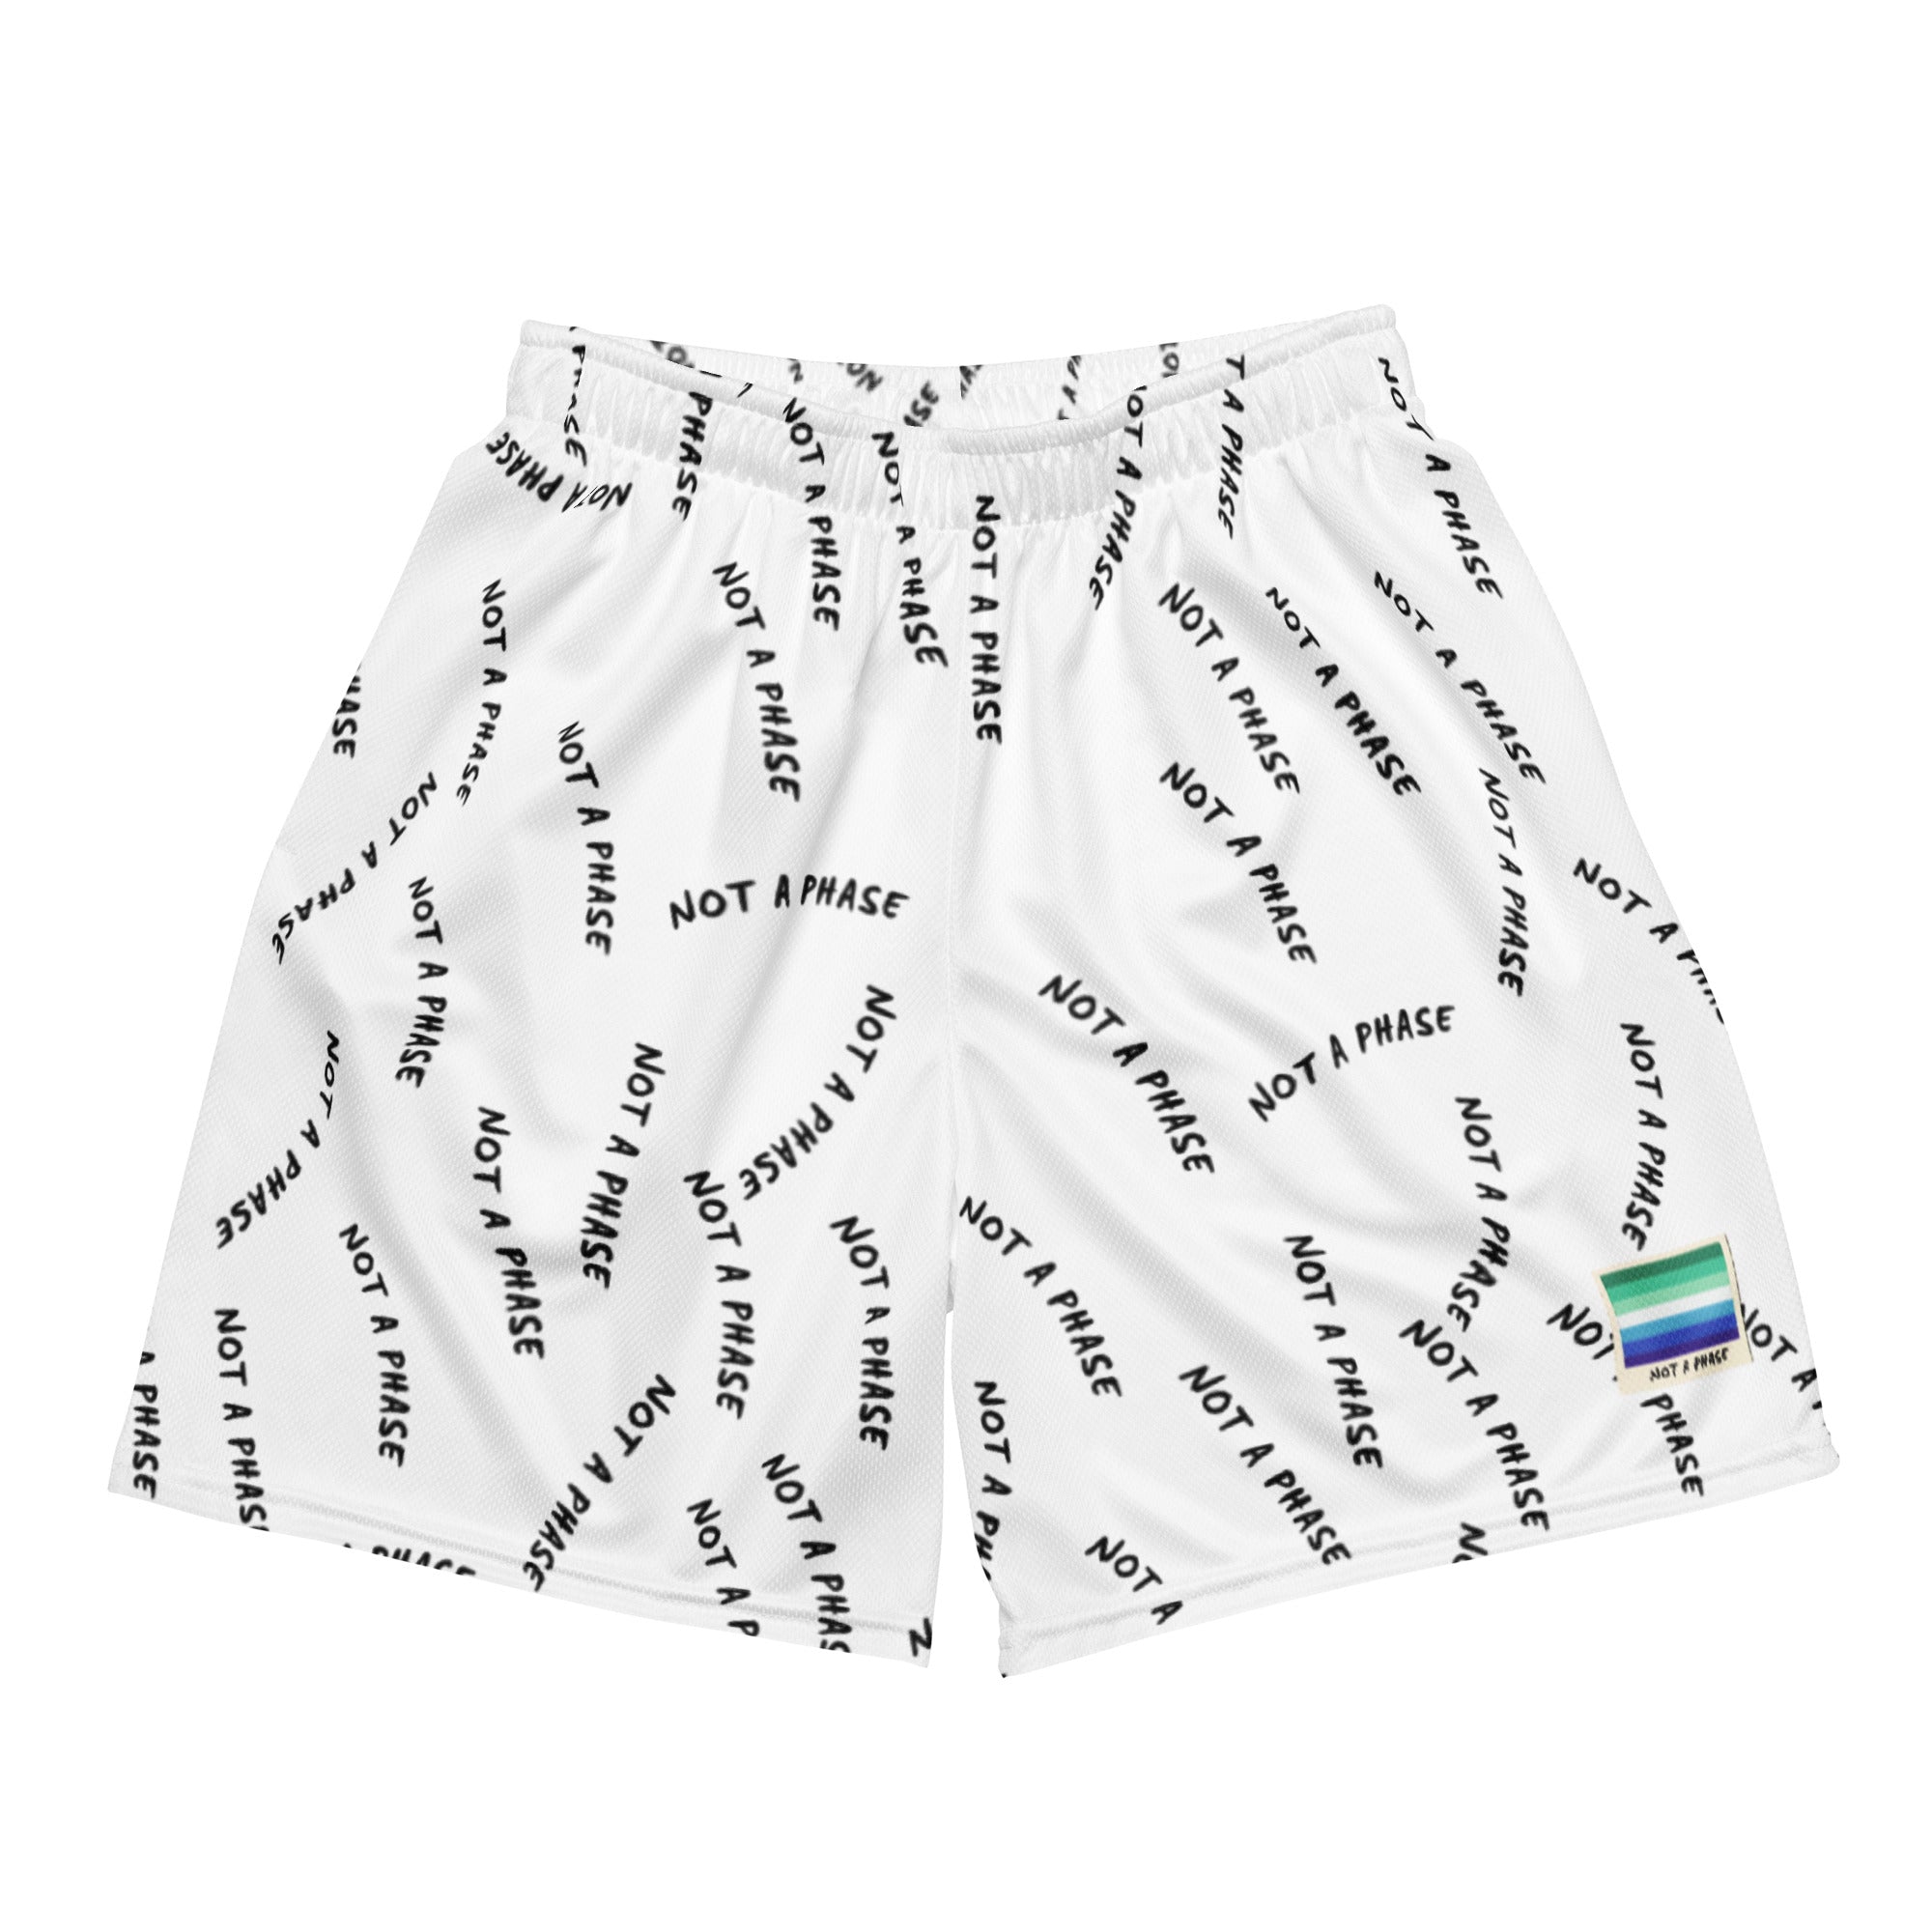 Not A Phase MLM Pride mesh shorts